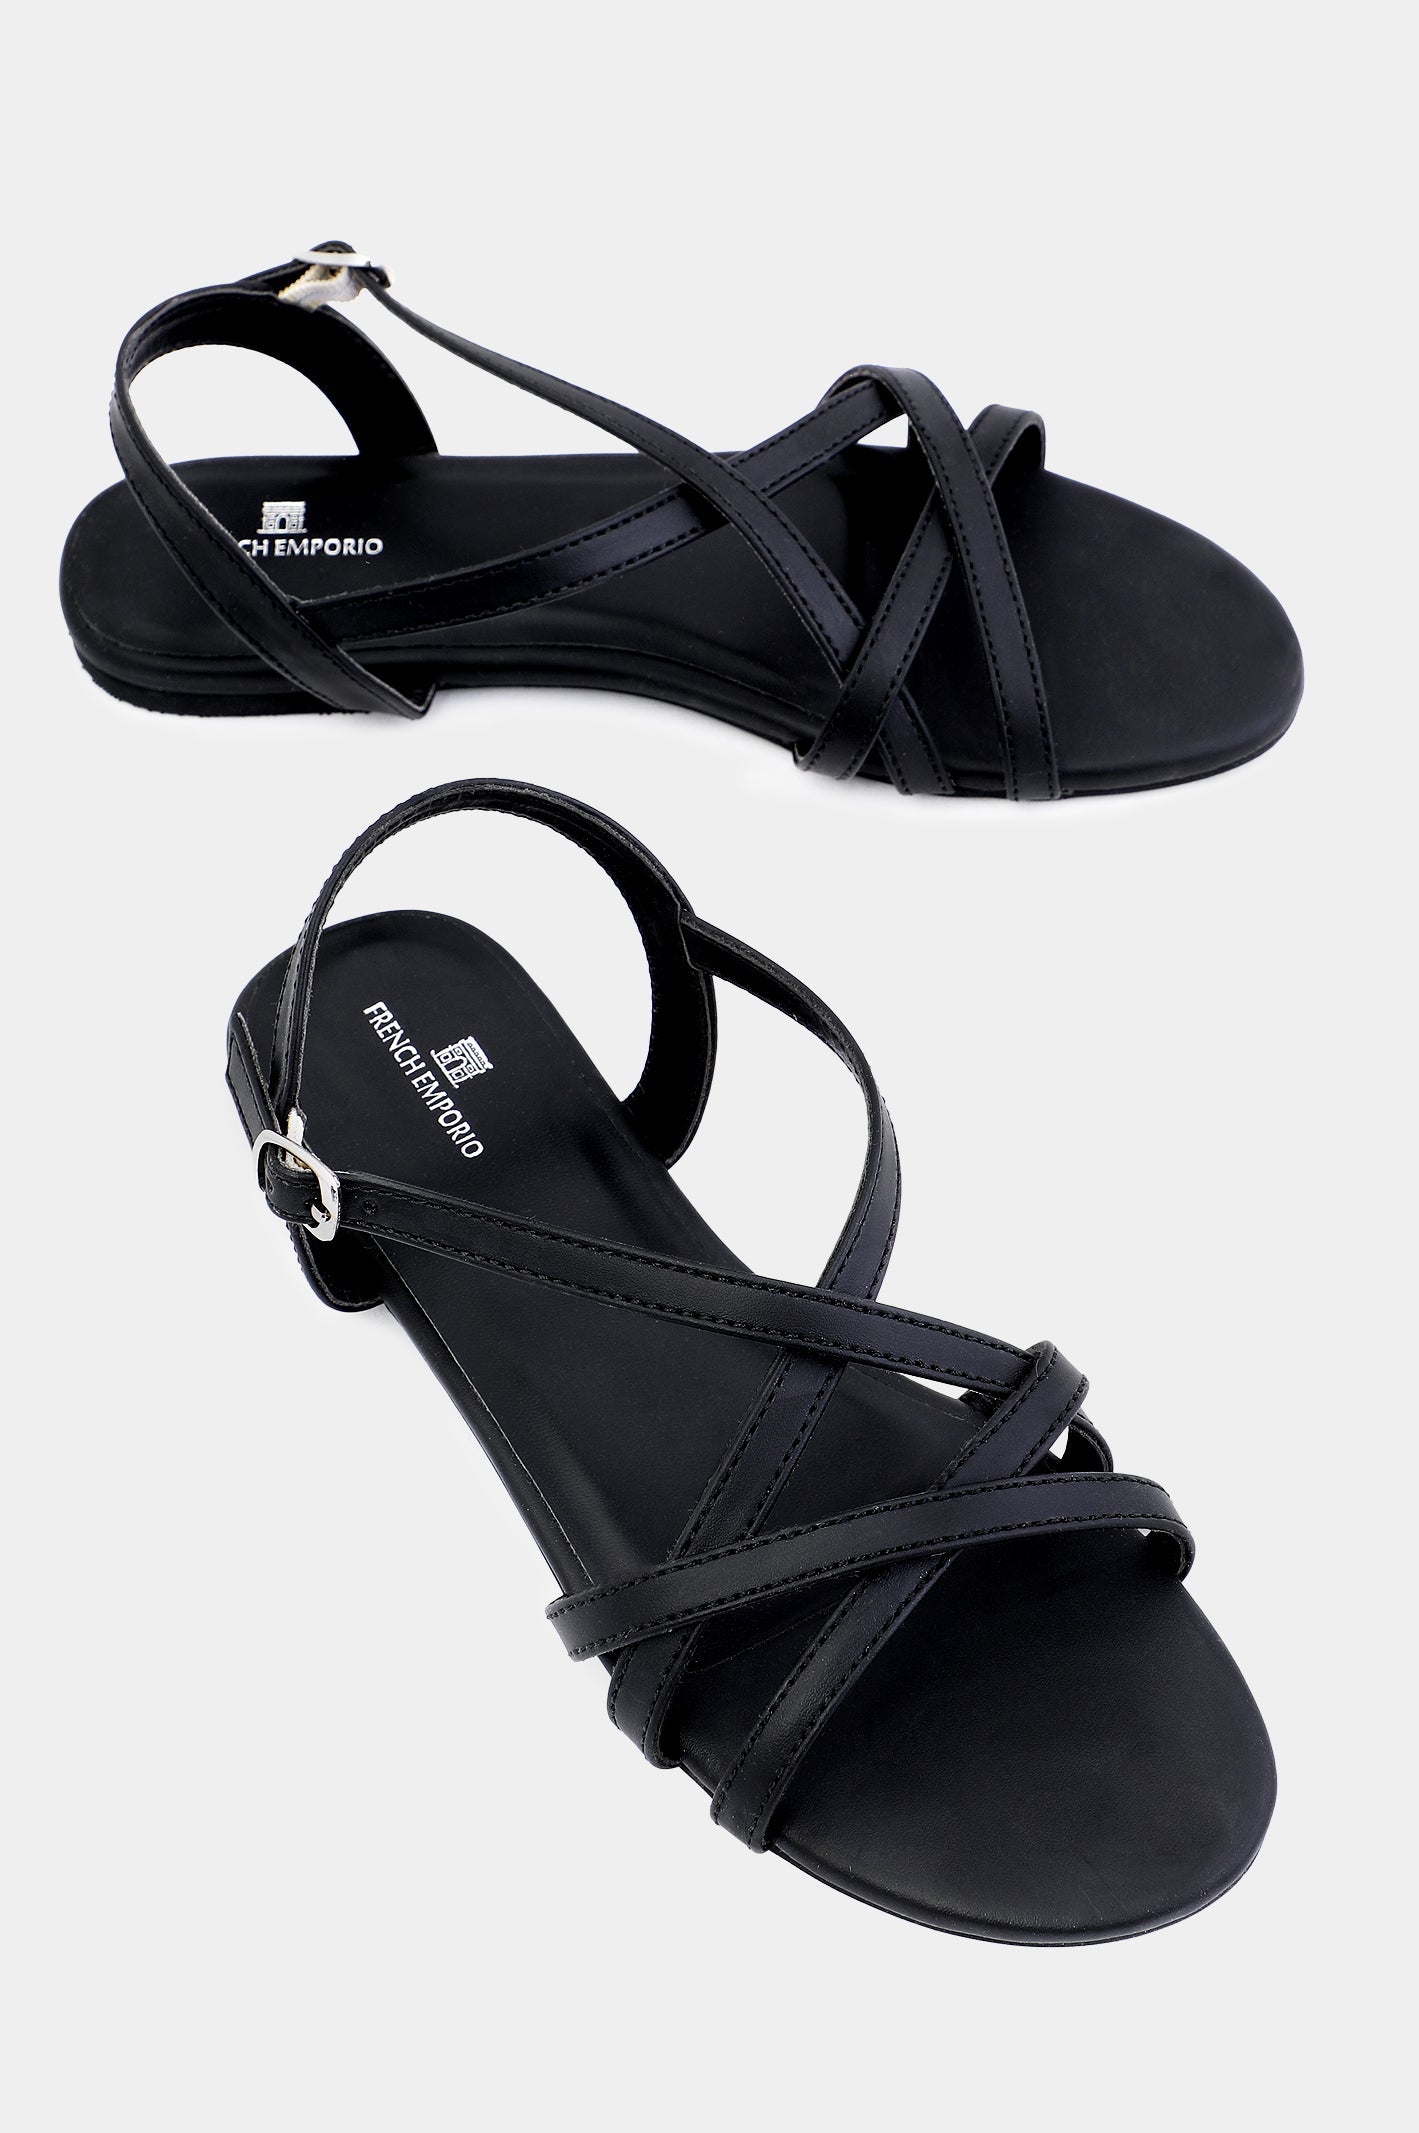 Ladies Formal Sandals From French Emporio By Diners